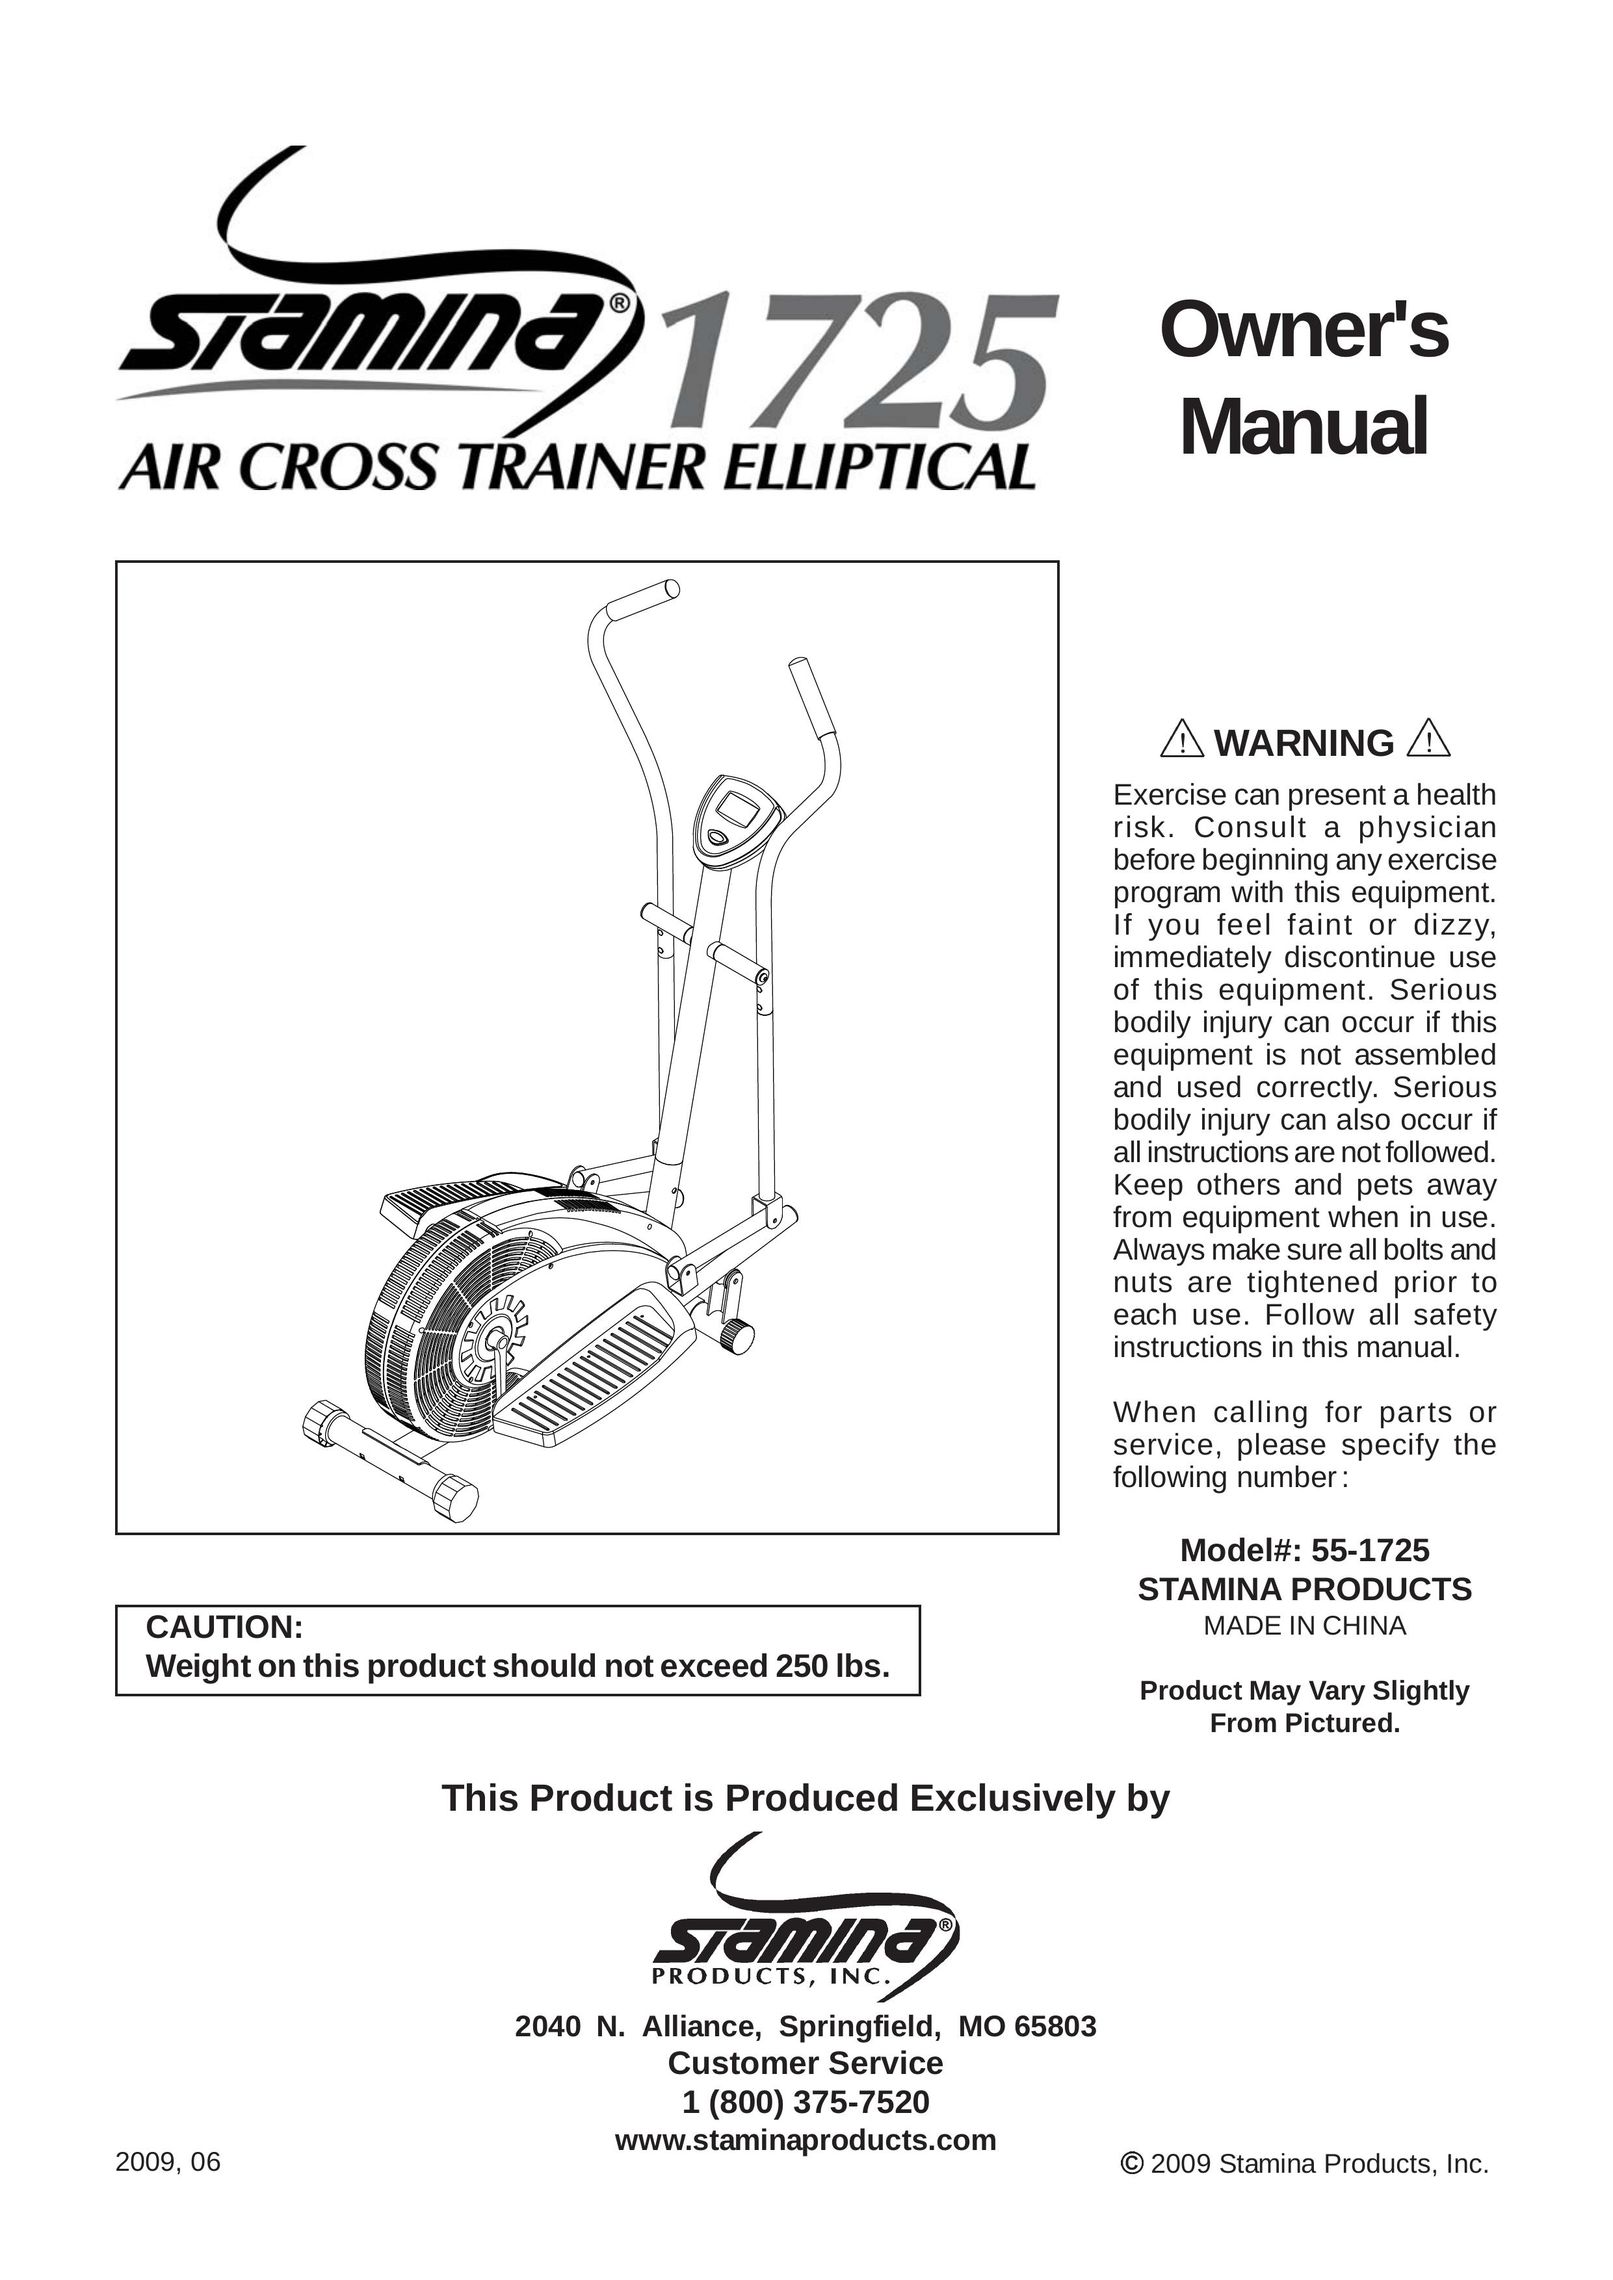 Stamina Products 55-1725 Exercise Bike User Manual